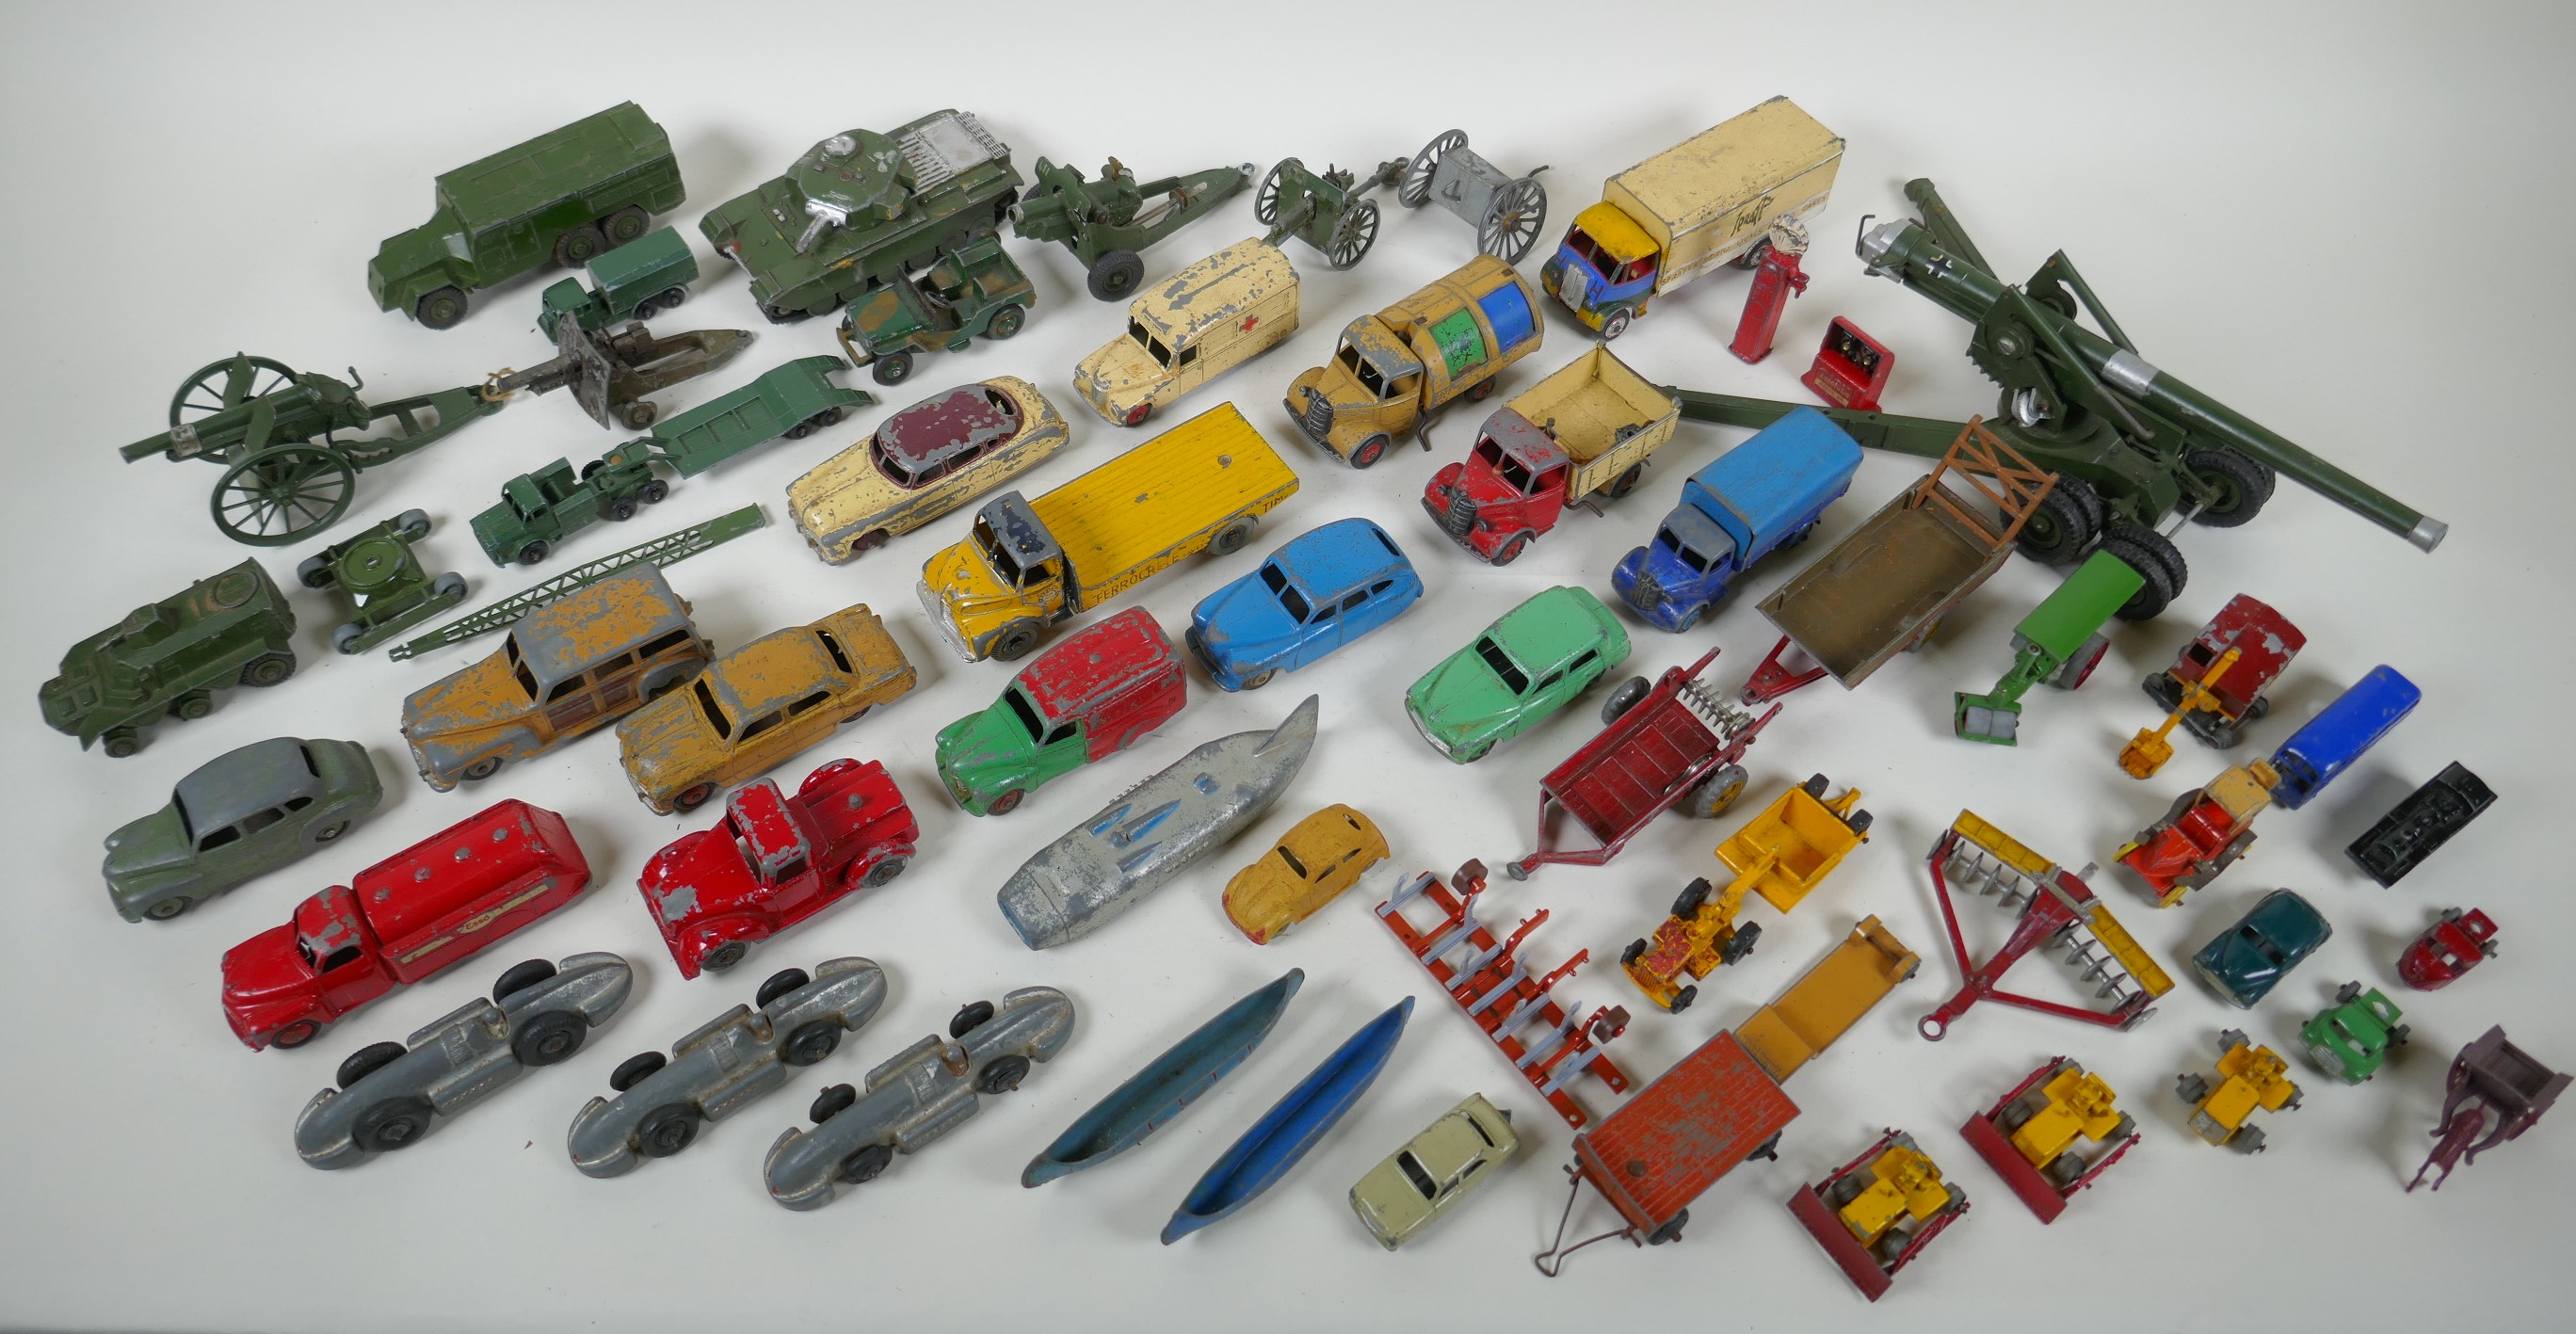 A collection of vintage die cast metal cars, trucks, military vehicles and farming vehicles,